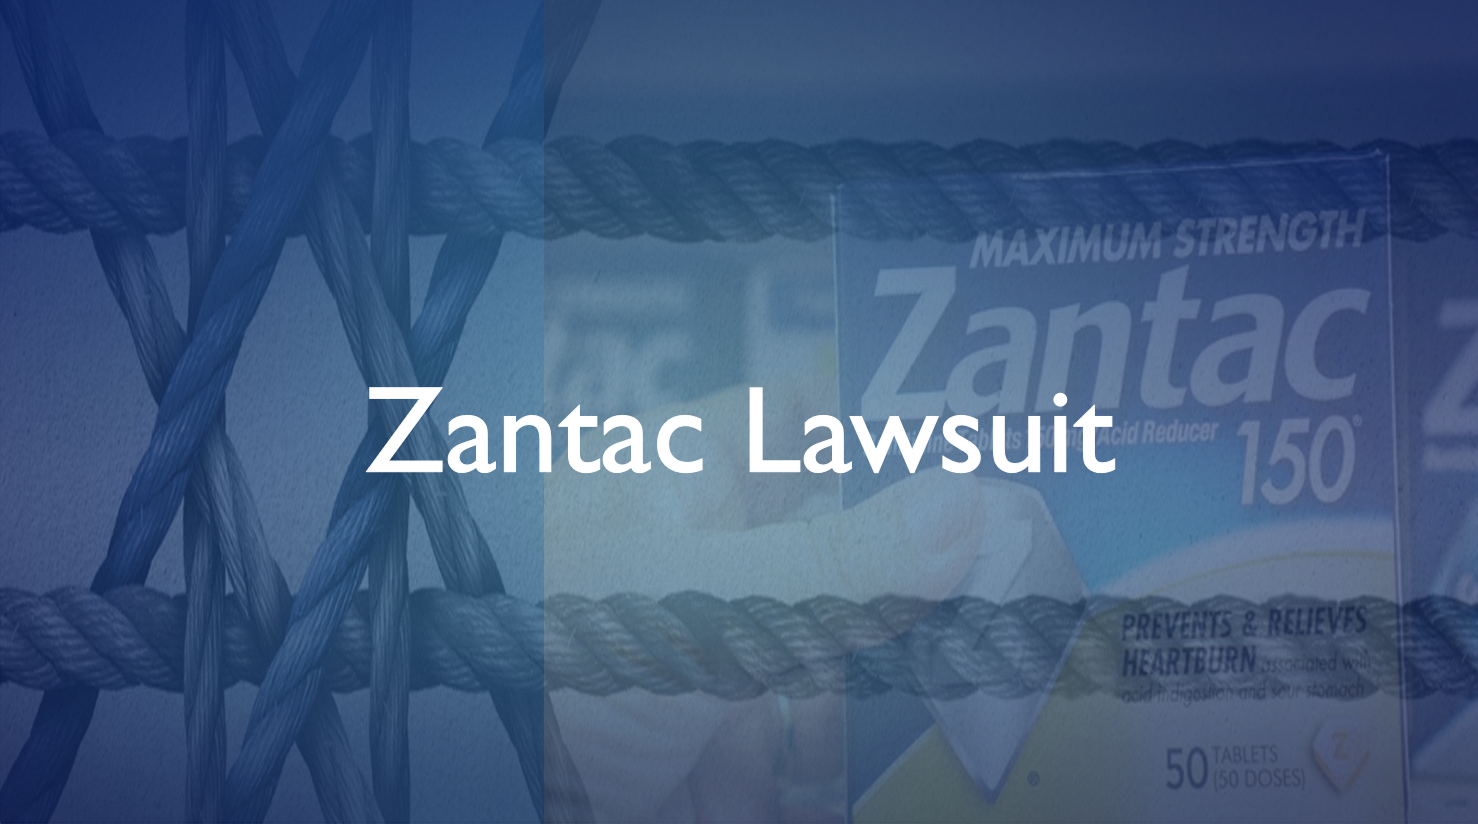 The Third Strike in the Zantac Lawsuit